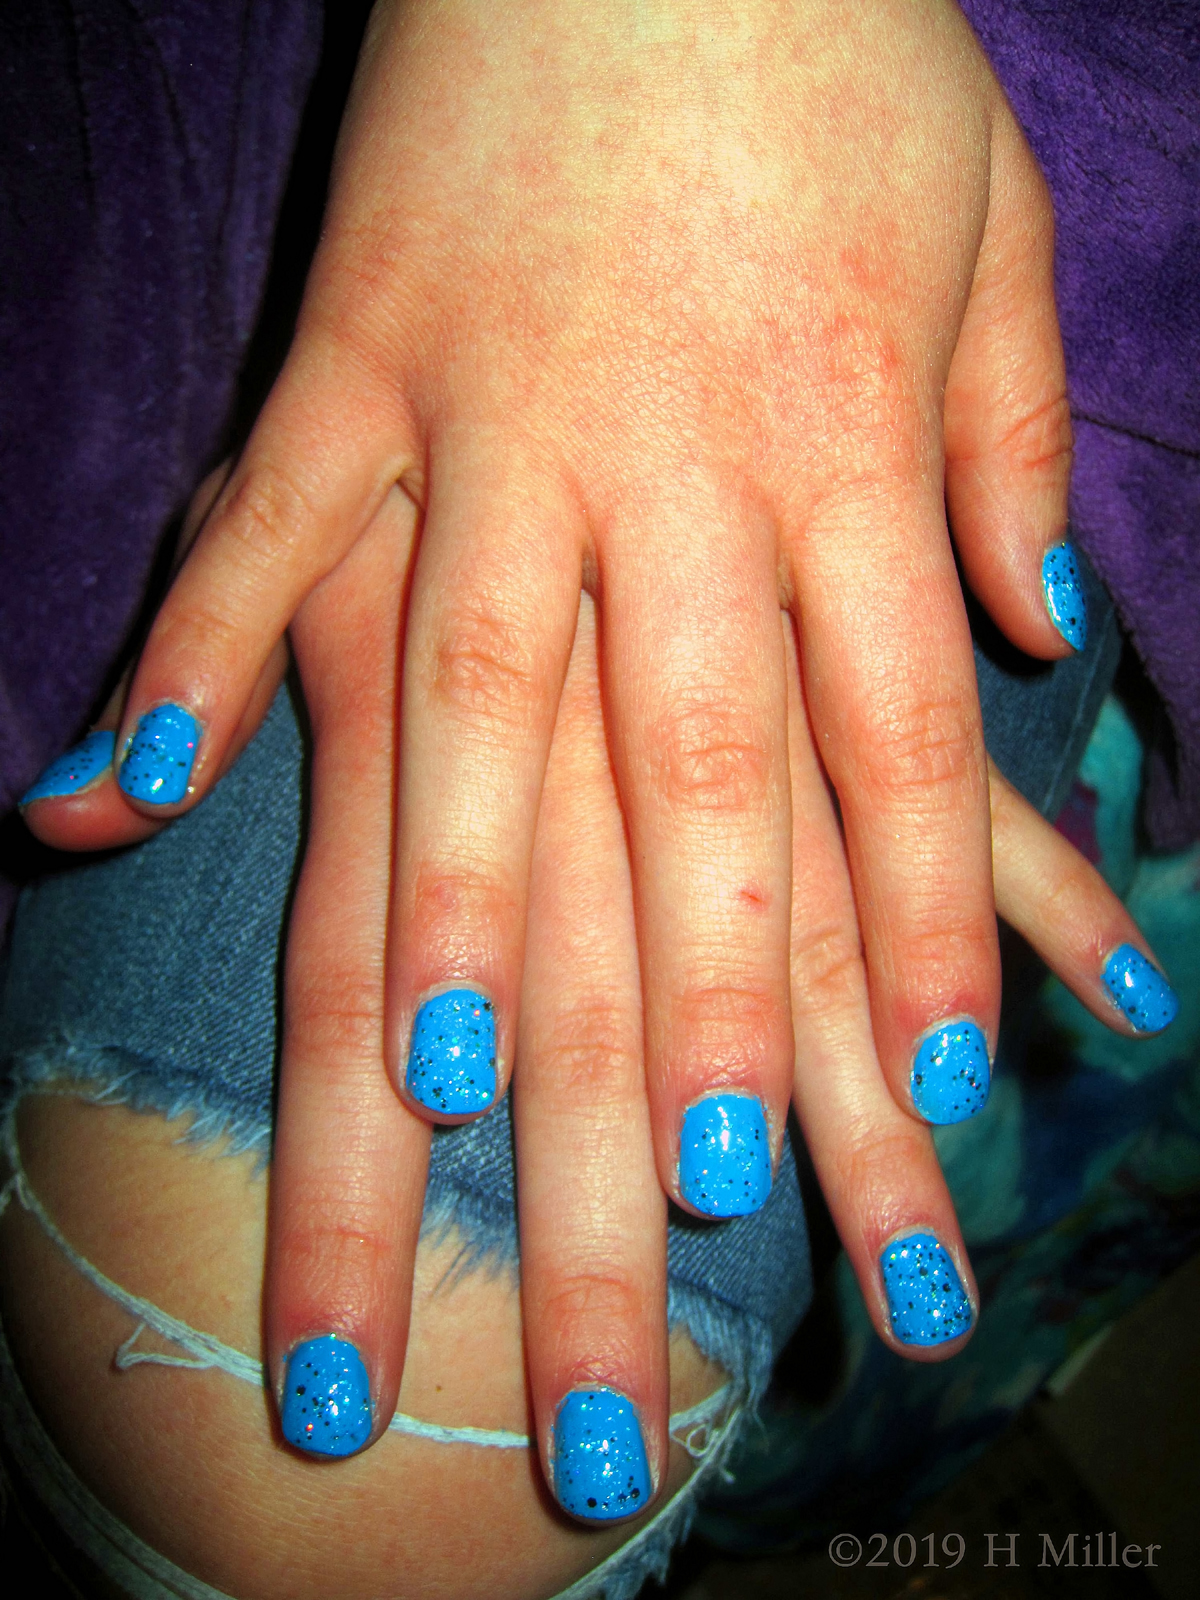 Completed Girls Mini Manicure With Bright Blue Polish!